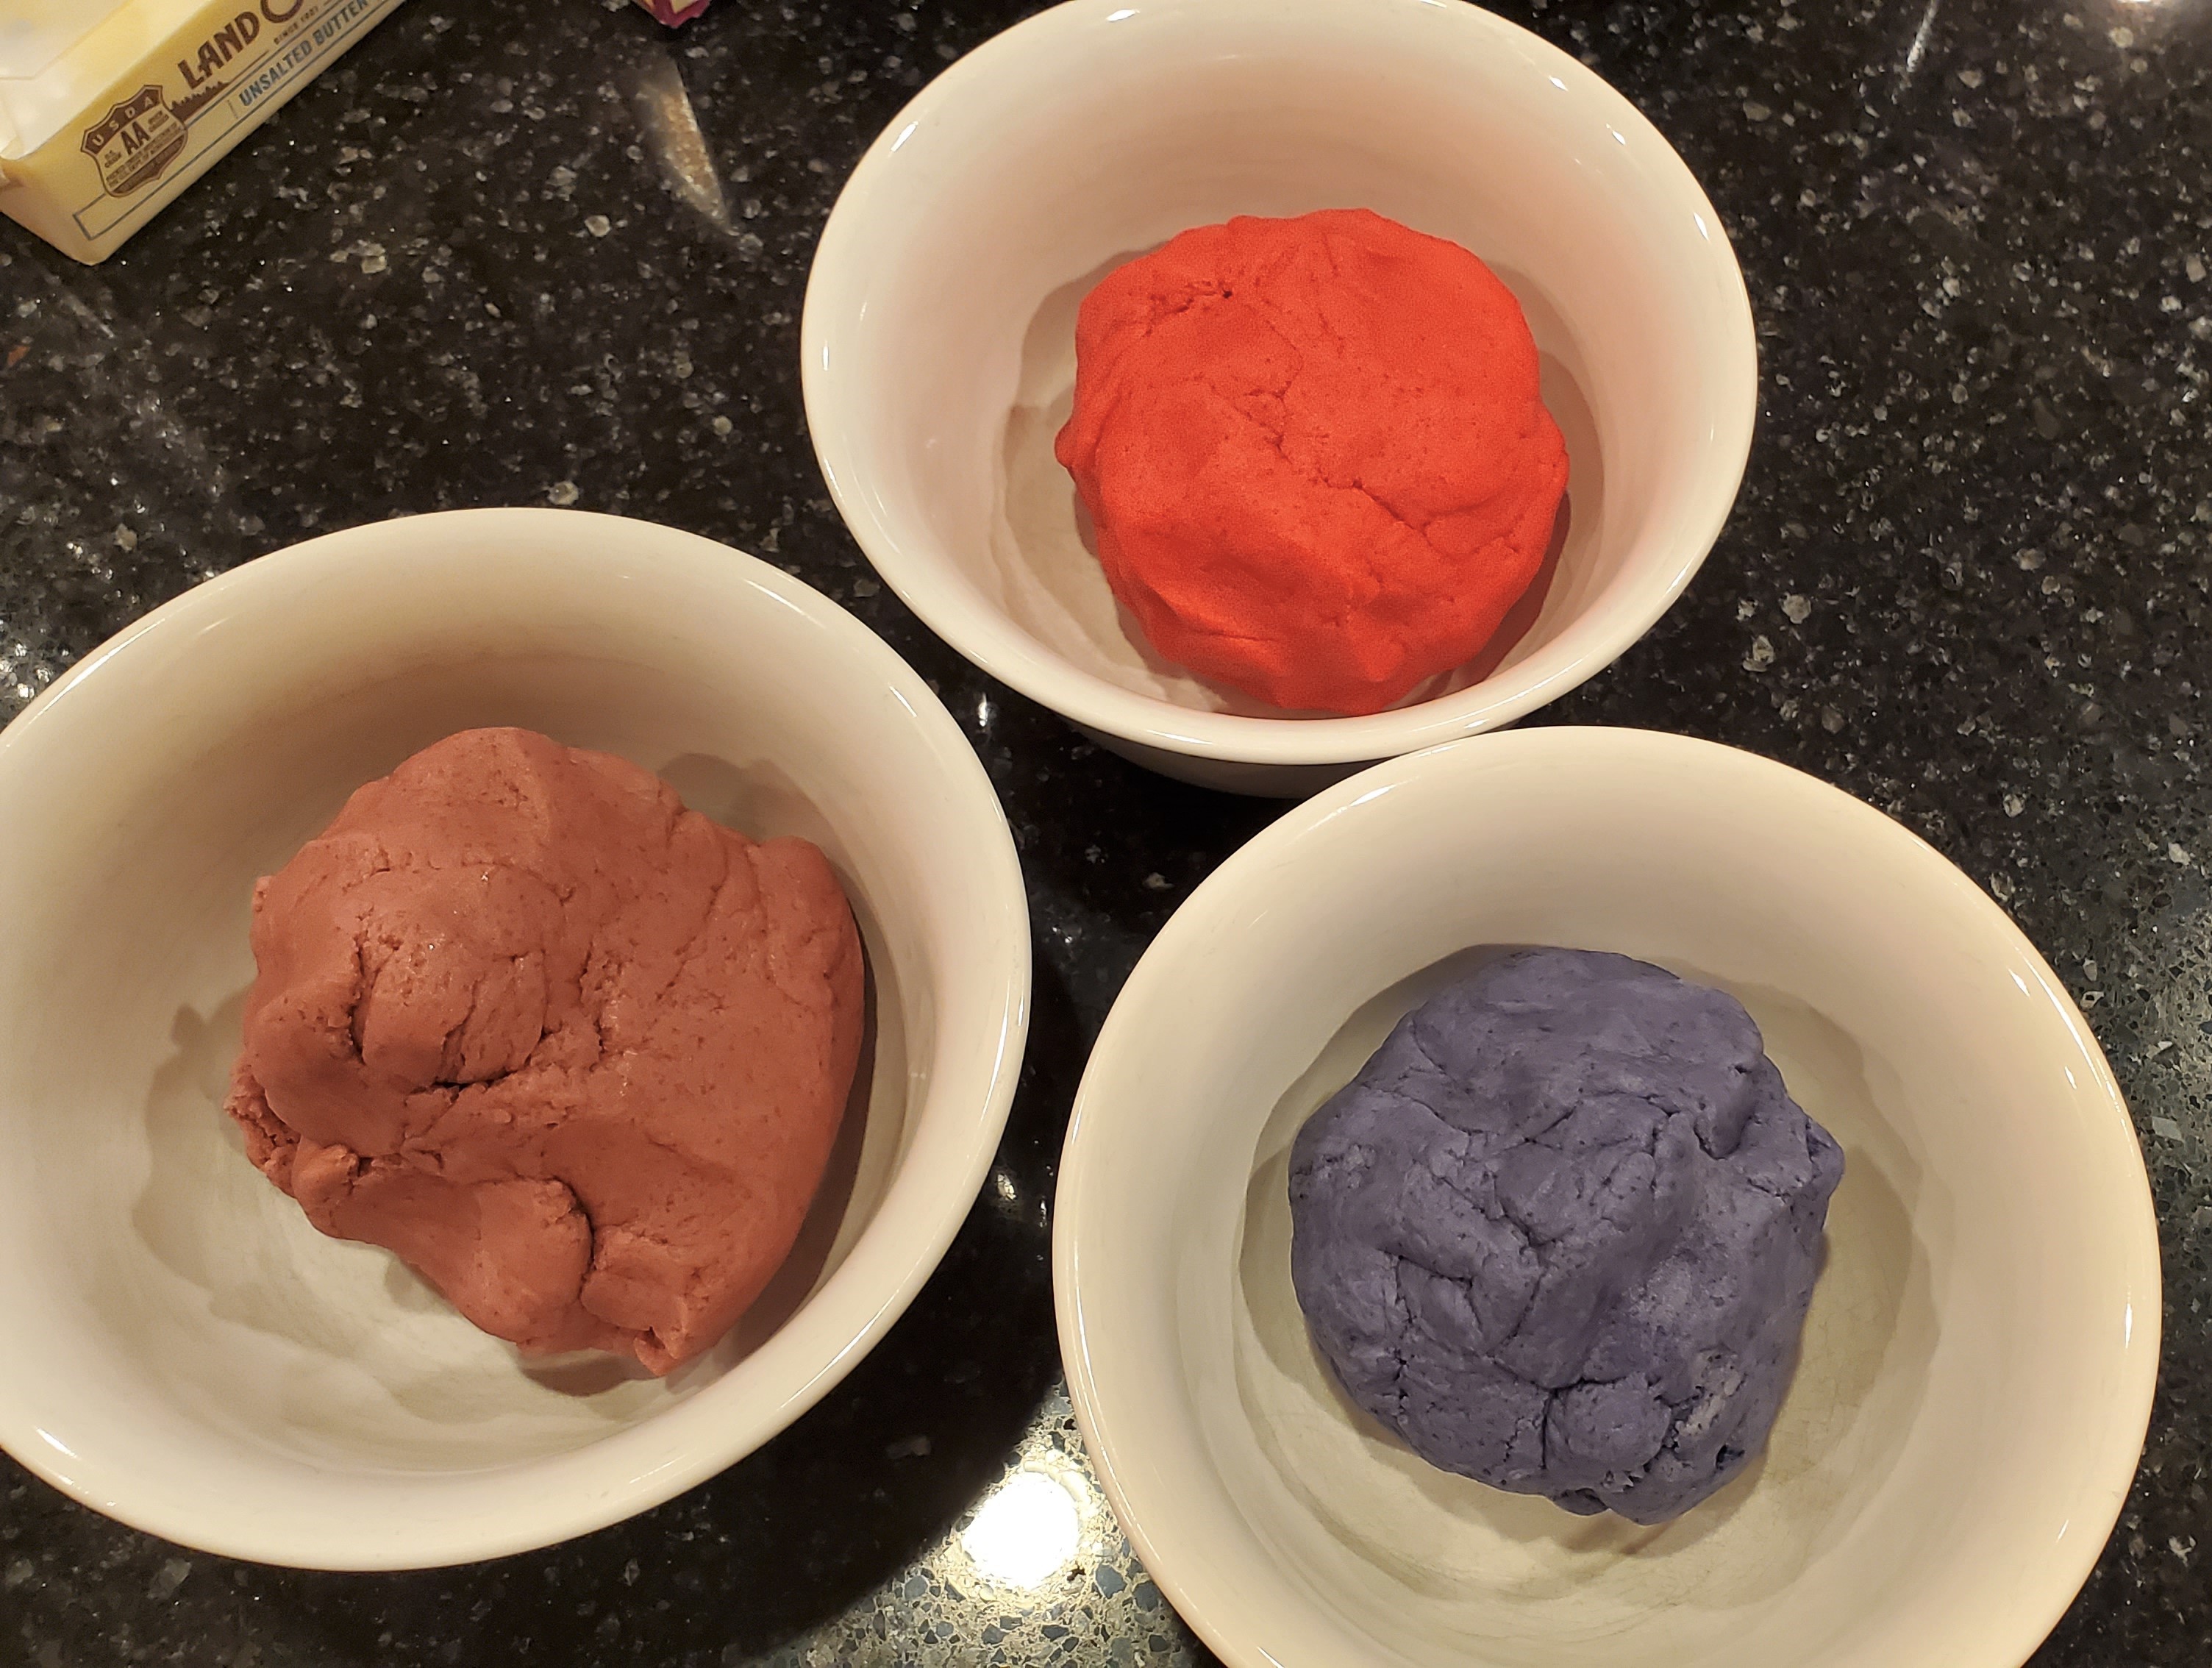 Three dough balls in pink, red and purple. Each are in individual white bowls on a black granite background. You can also see a partial stick of butter and some flour.